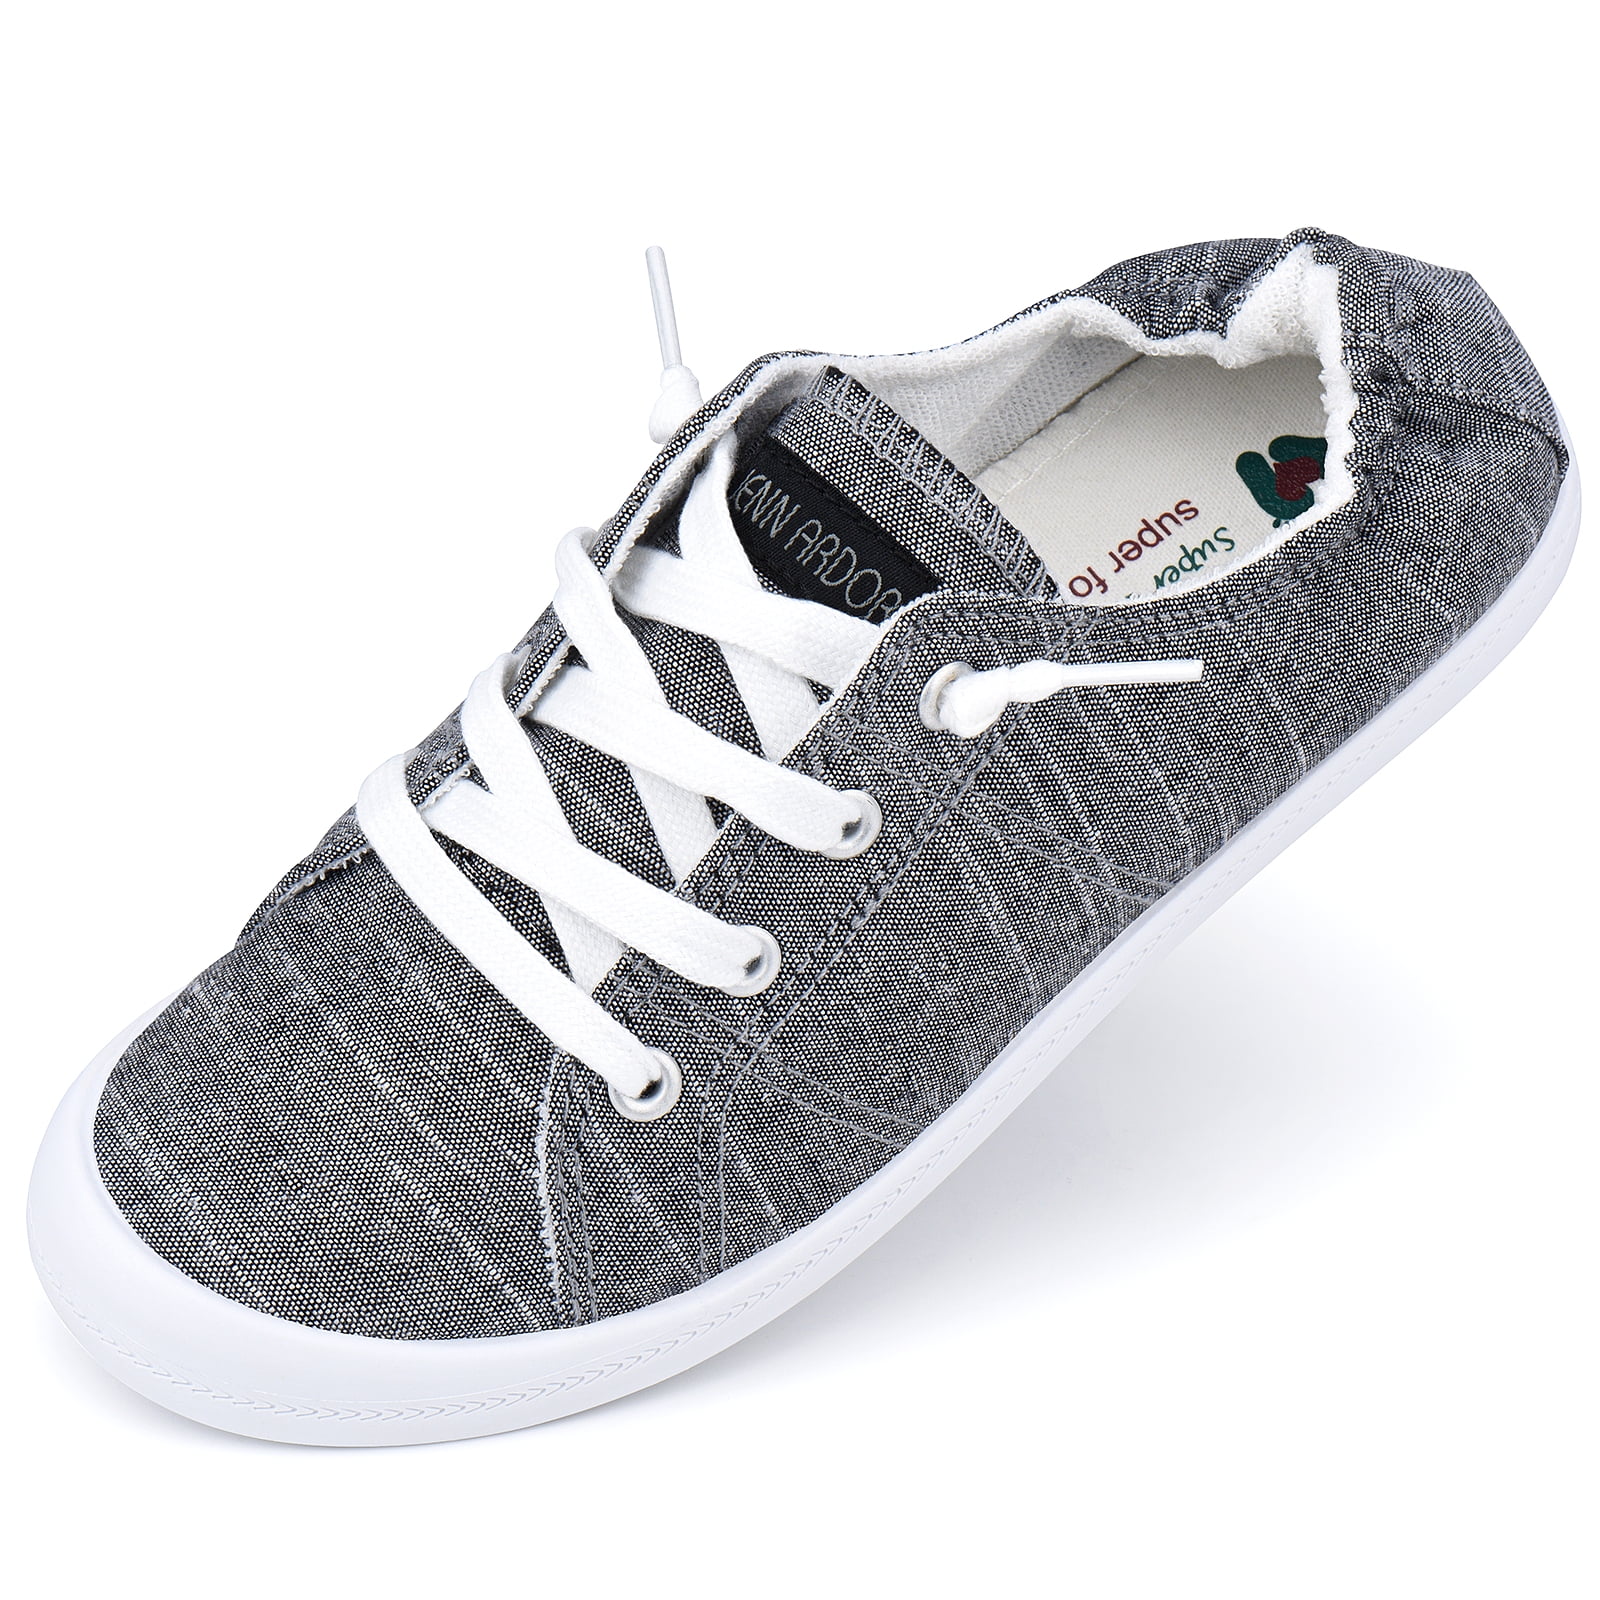 Mens Sneakers Beautiful Artistic Graphical Tropical Canvas Slip-on Casual Printing Comfortable Low Top Sneakers